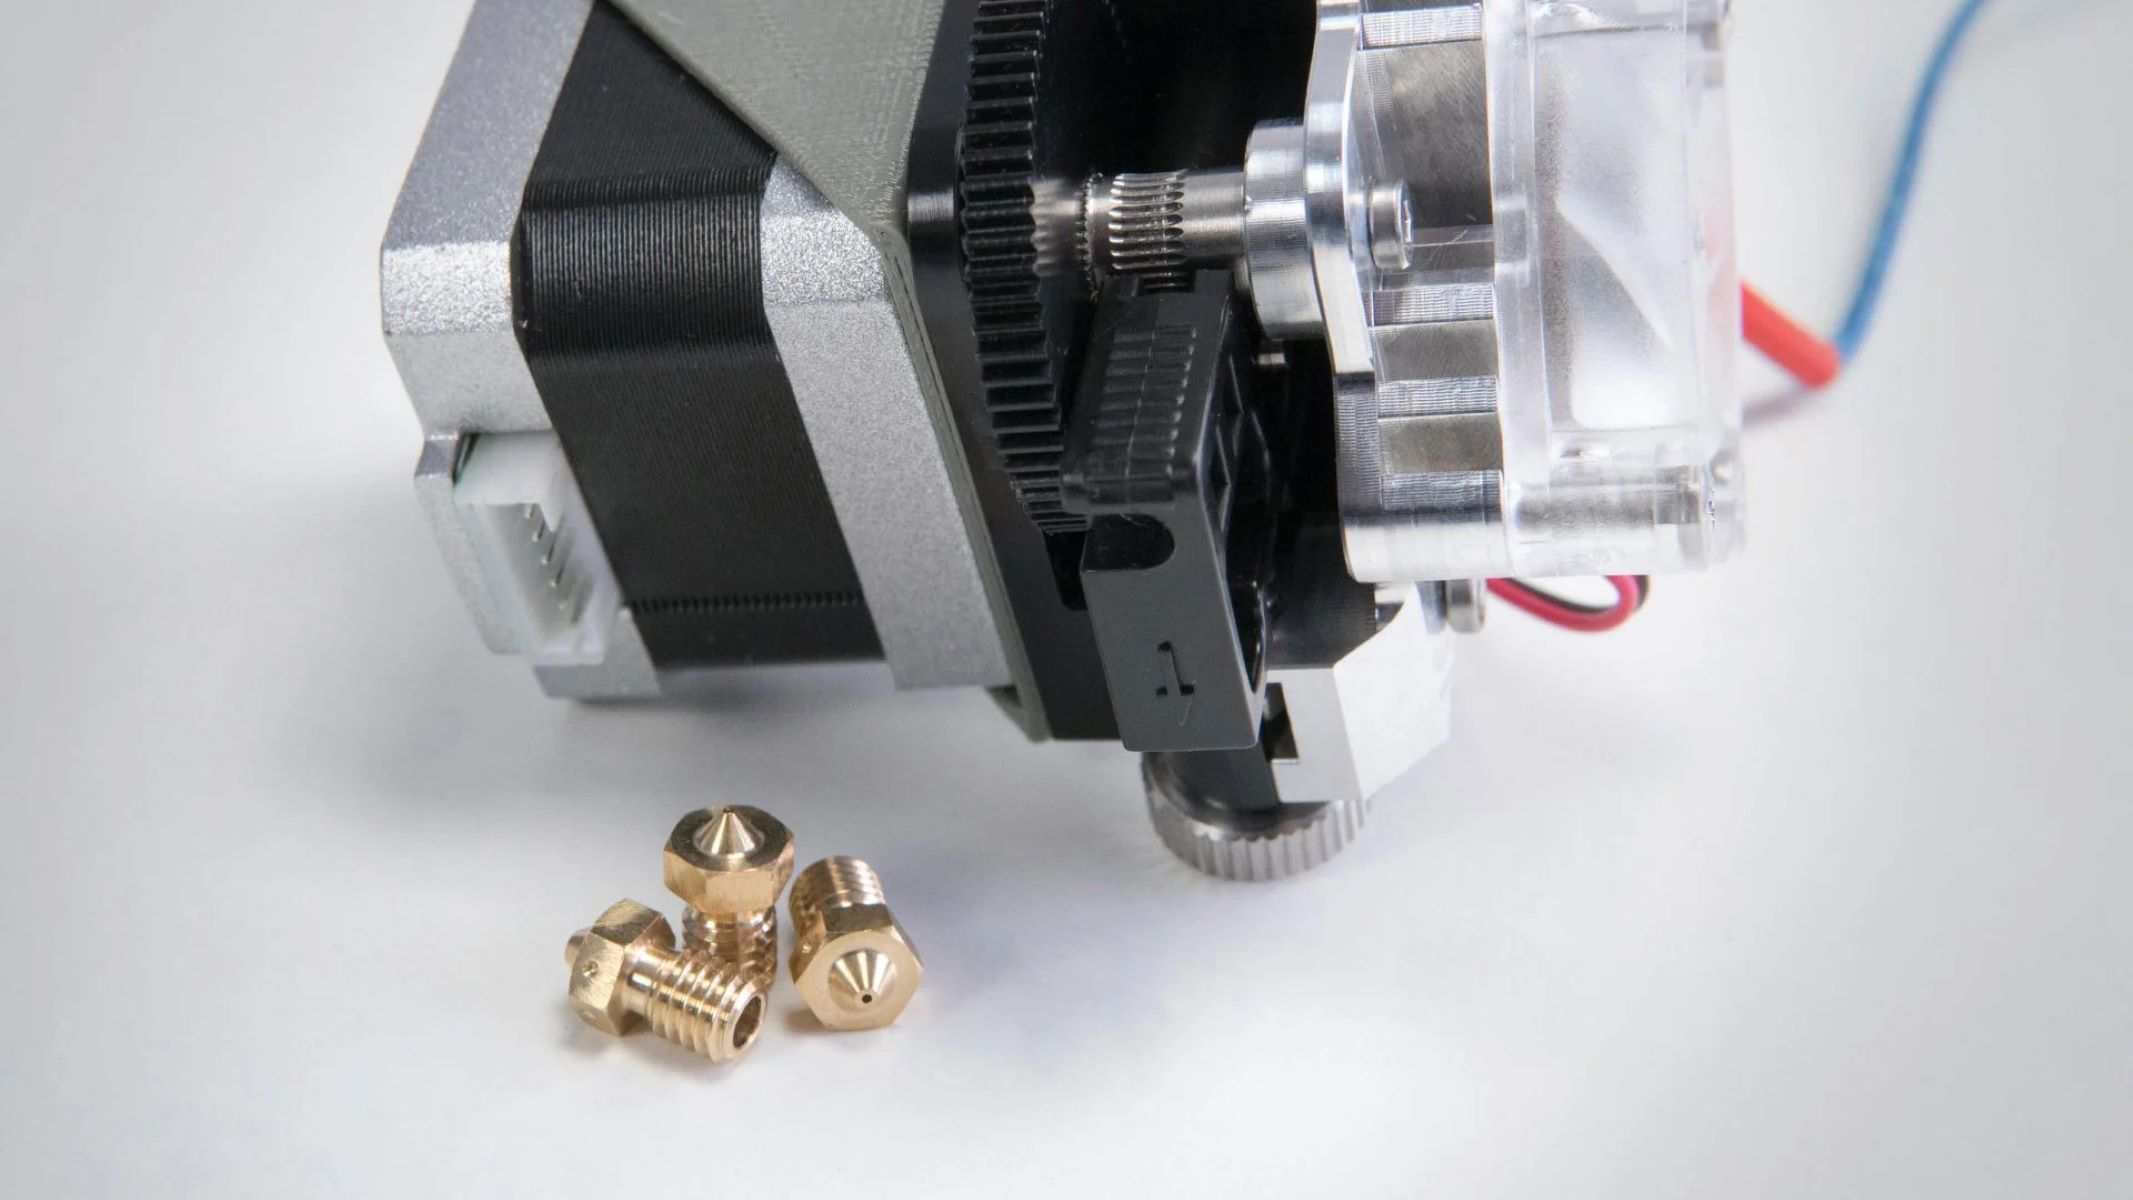 What Does The Extruder Do In A 3D Printer